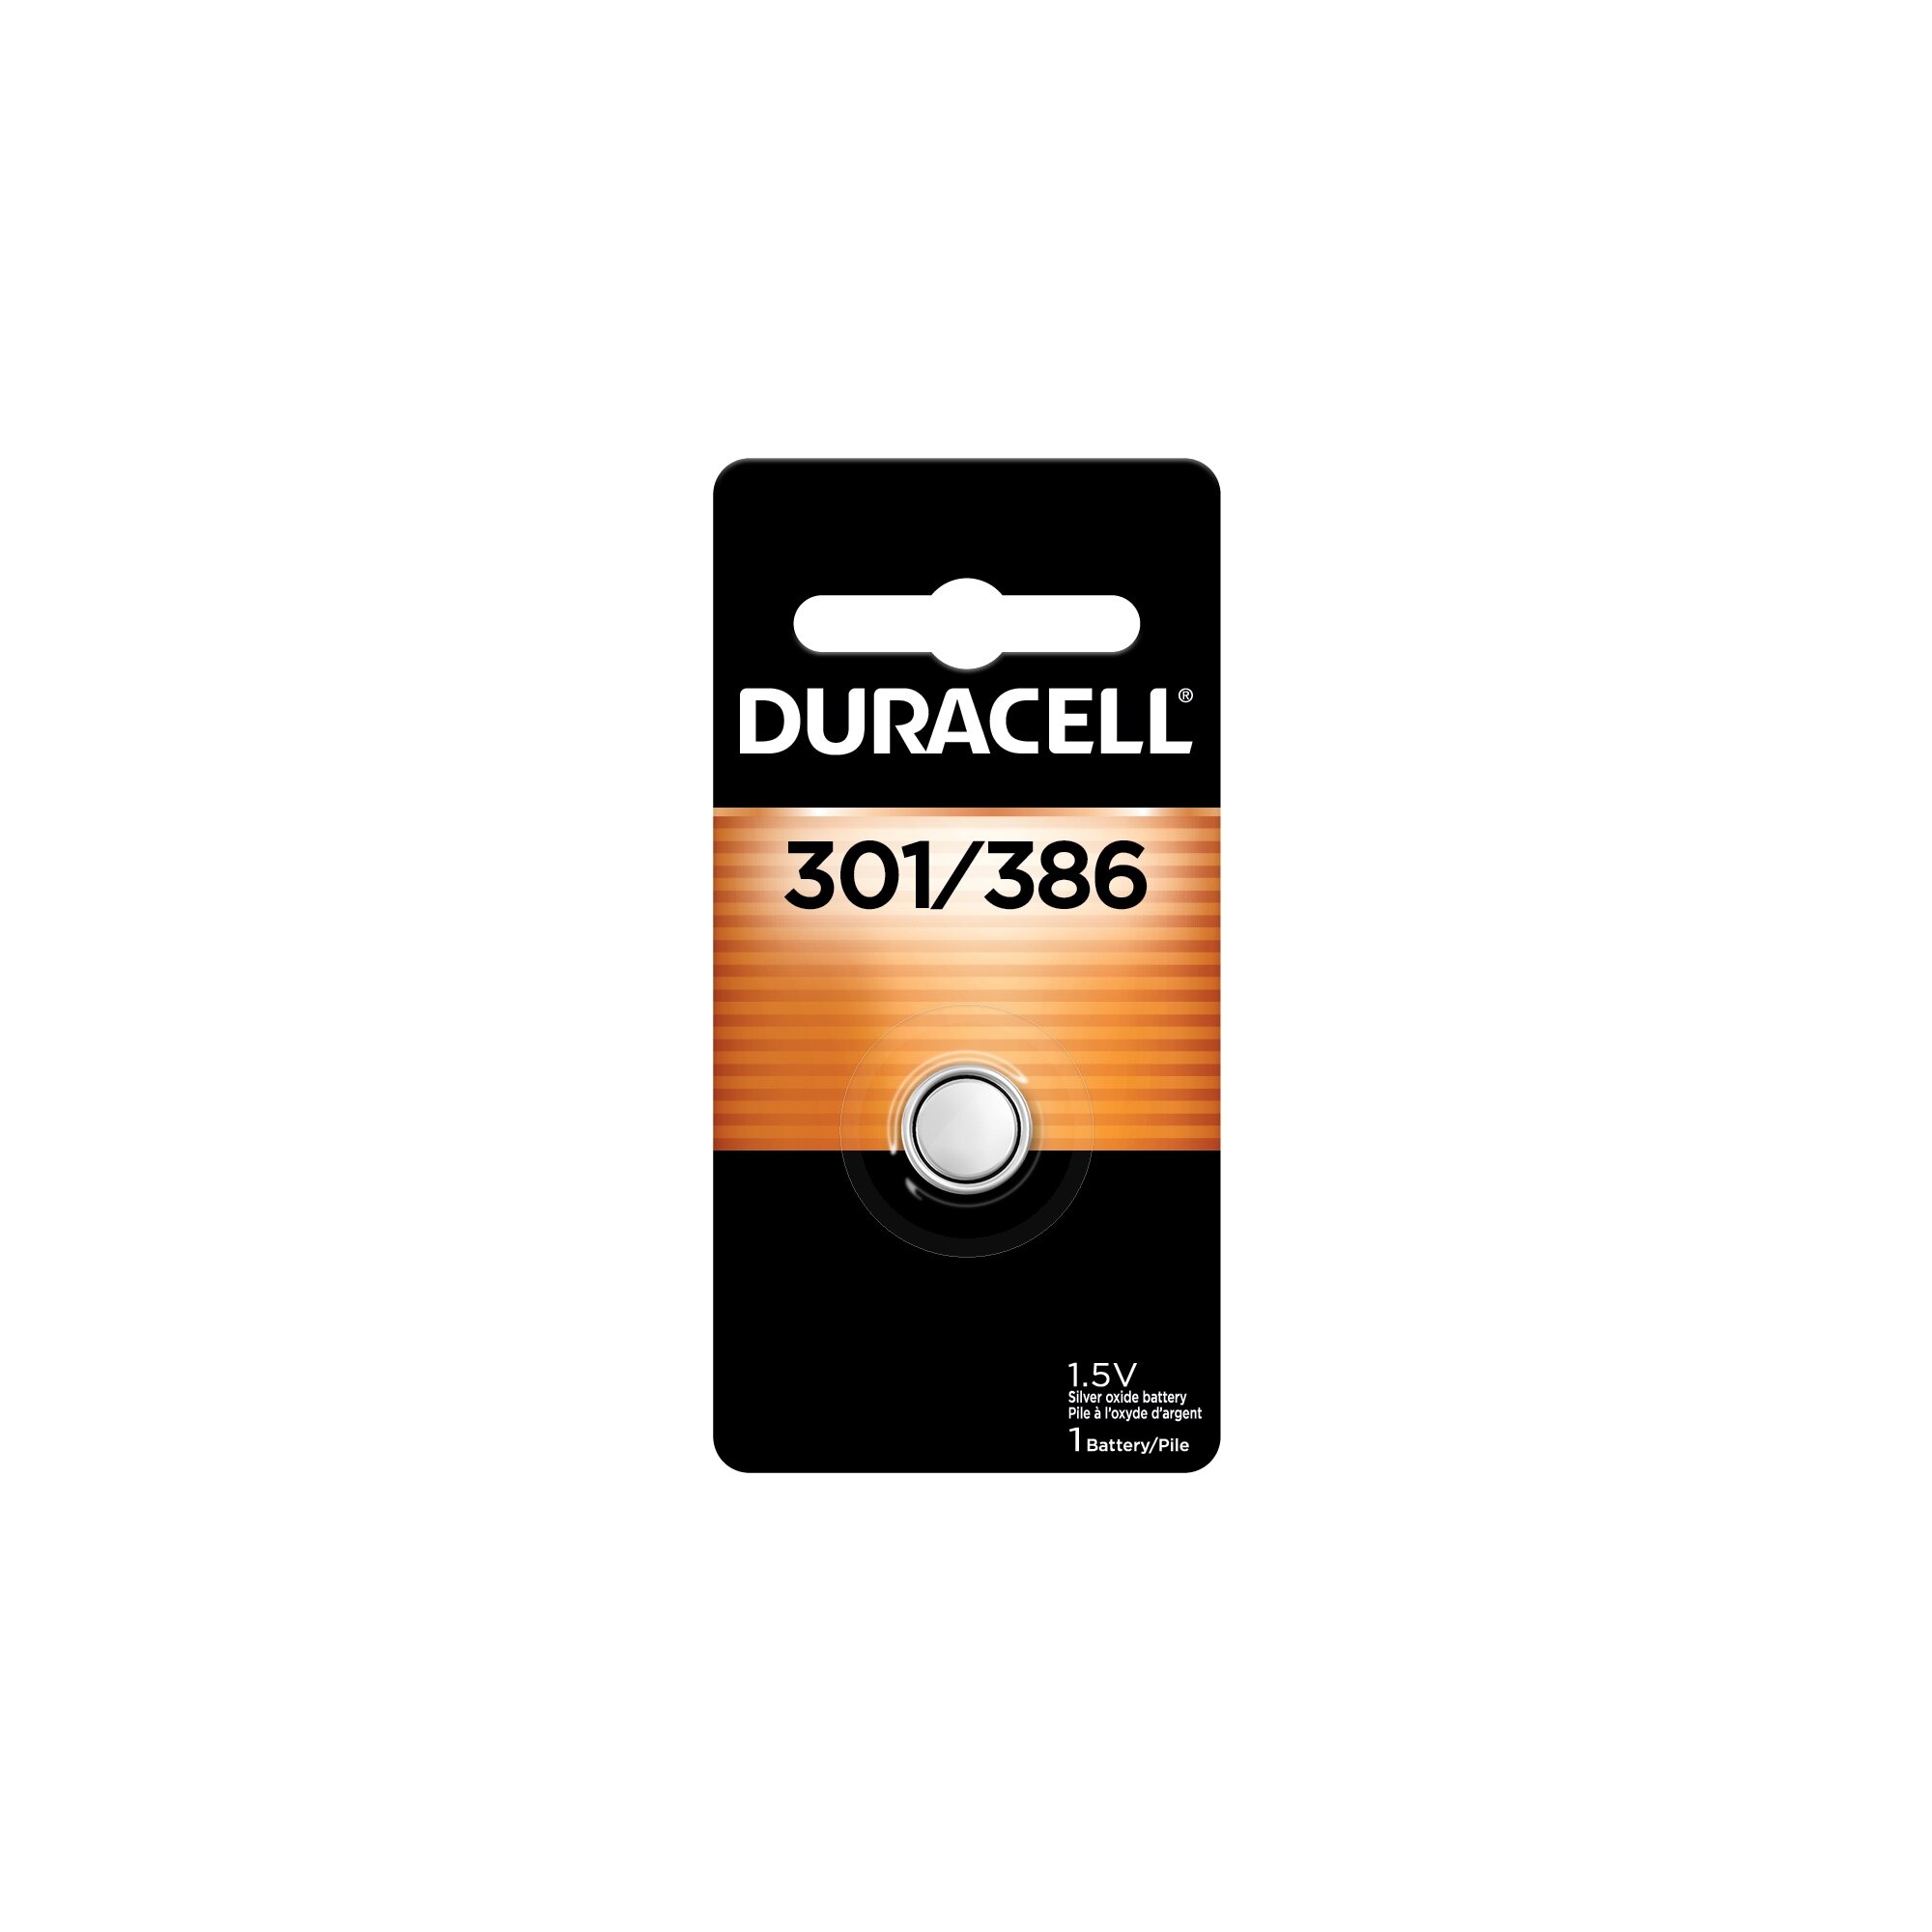 Duracell 301/386 Silver Oxide Battery, 1-Pack